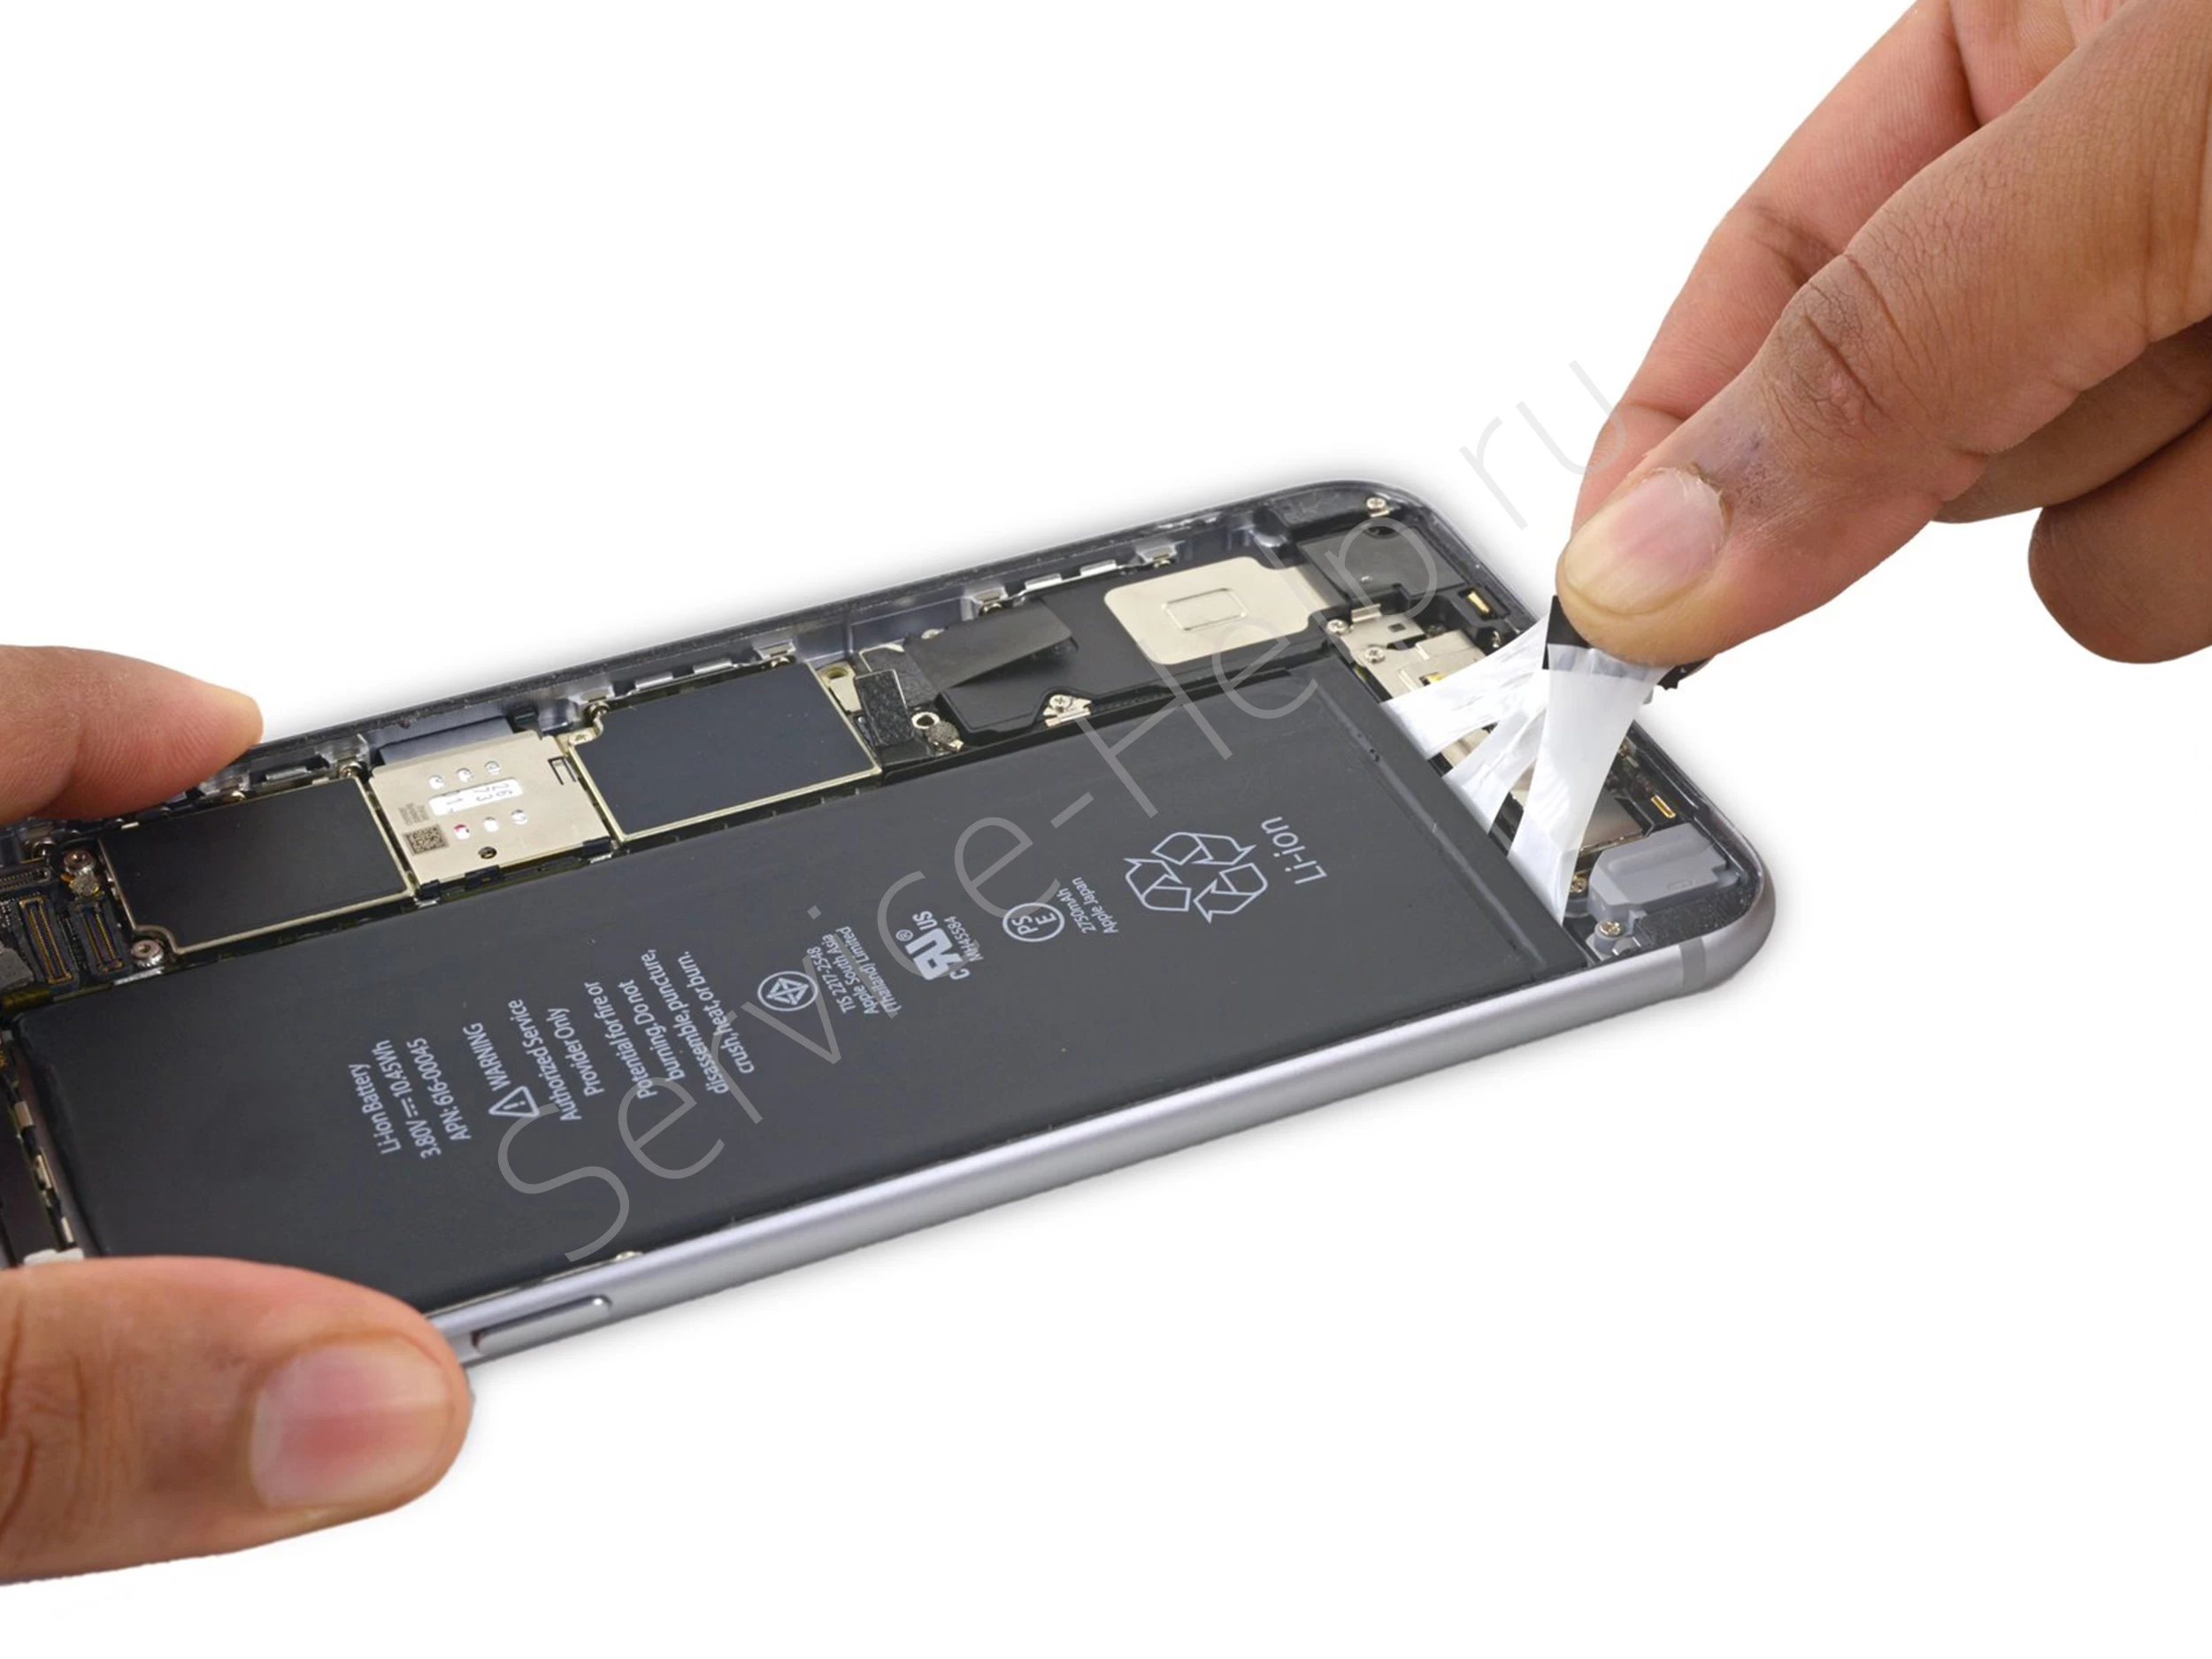 Iphone 6s Plus Battery. Аккумулятор iphone 6 Plus Battery. АКБ iphone 6. Iphone 6s Battery Replacement.